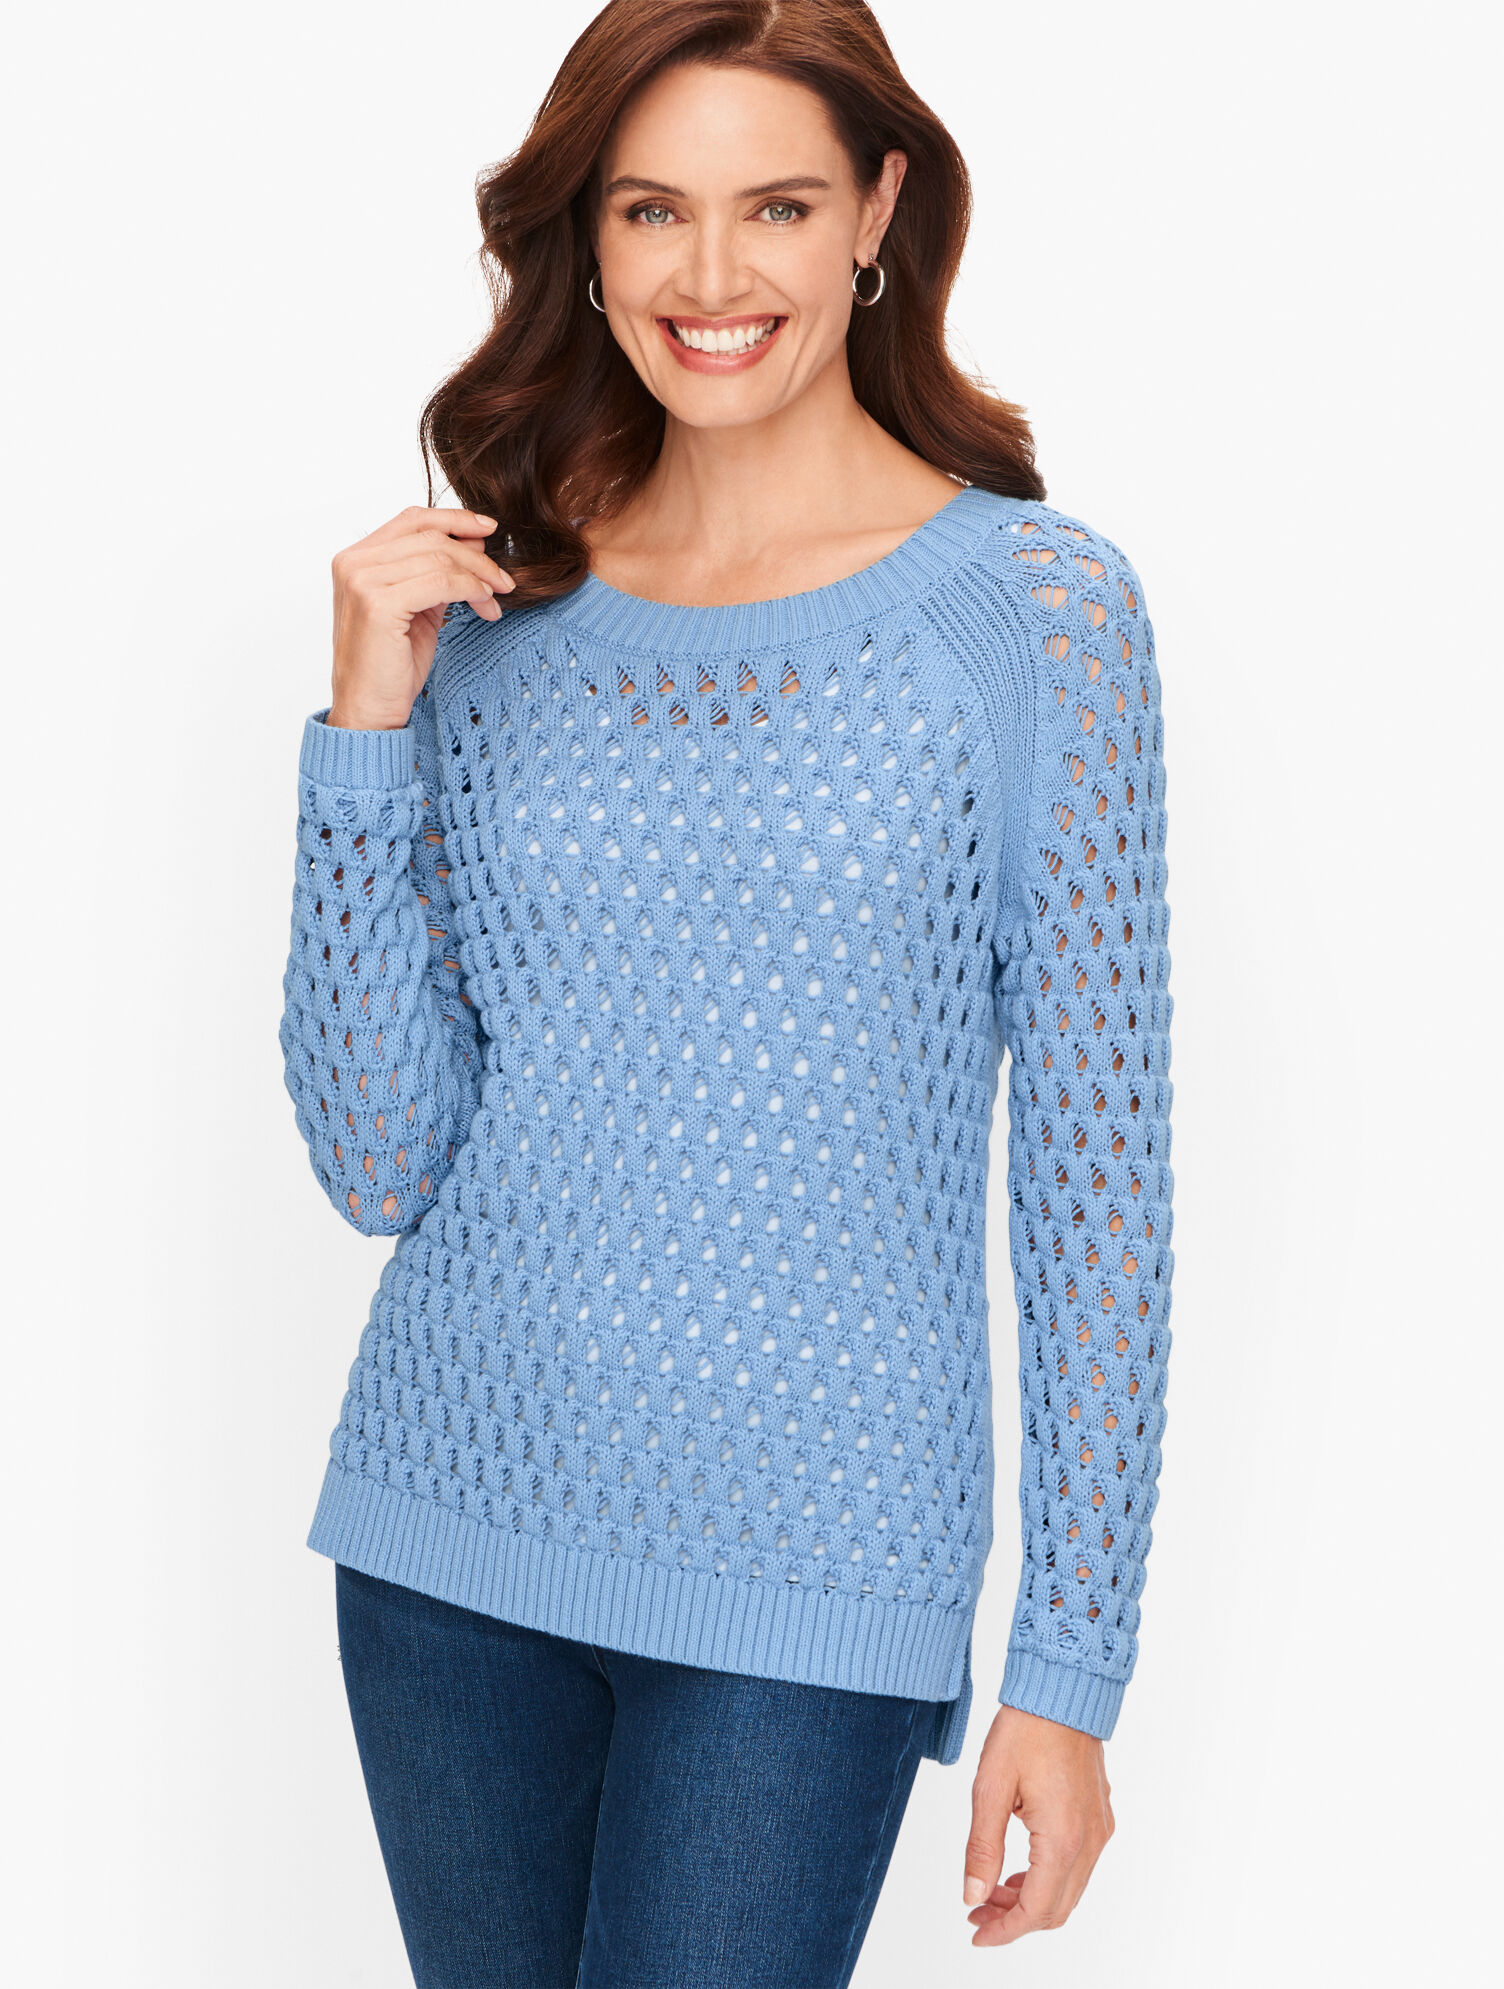 Southern Anchors: {spring open knit sweater}